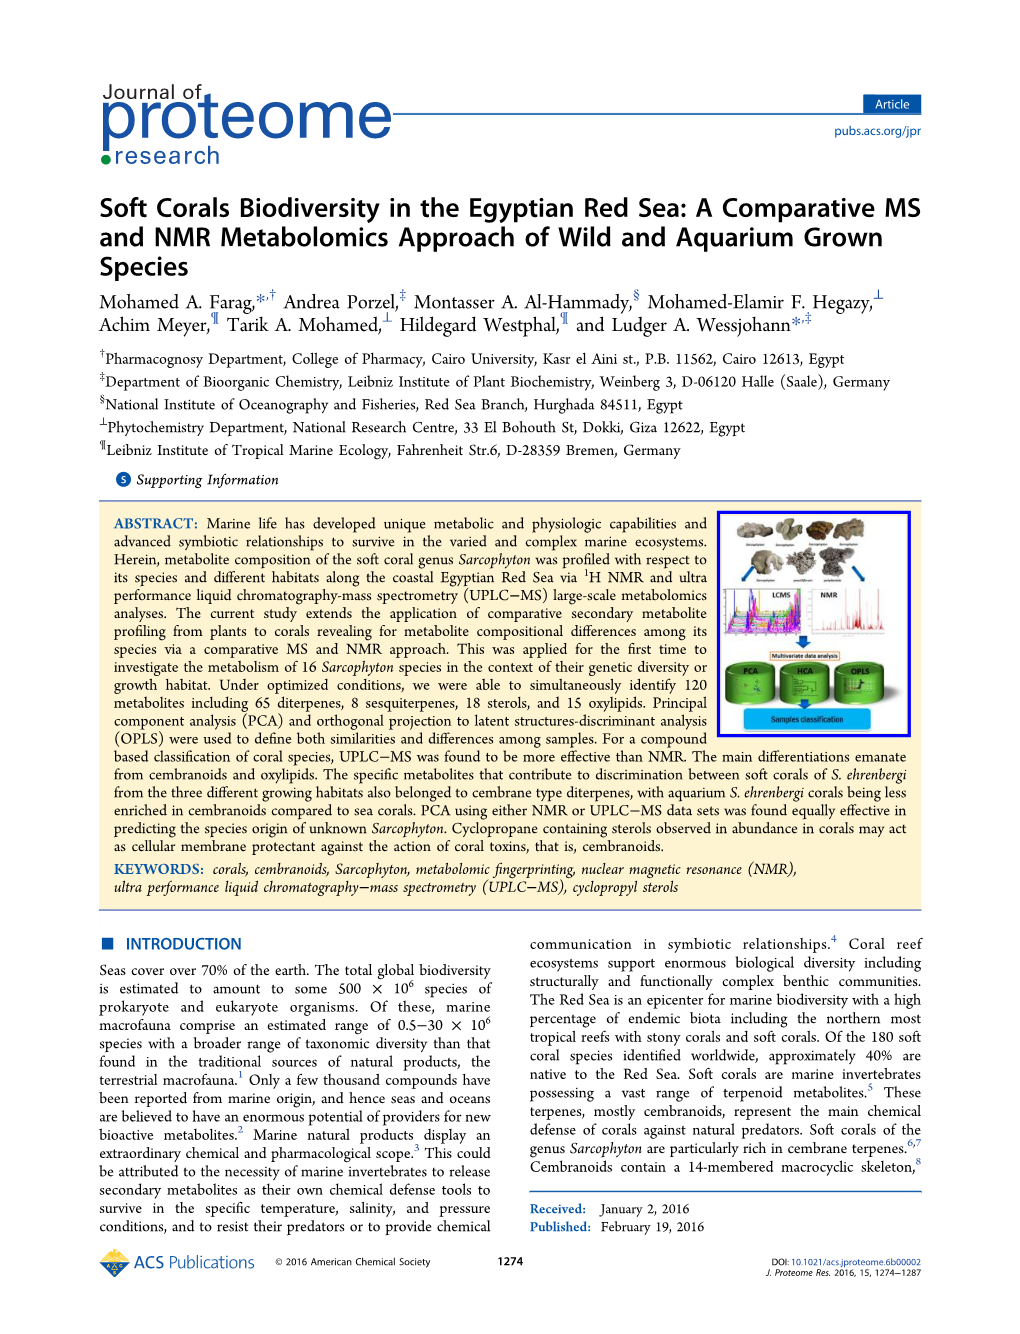 Soft Corals Biodiversity in the Egyptian Red Sea: a Comparative MS and NMR Metabolomics Approach of Wild and Aquarium Grown Species † ‡ § ⊥ Mohamed A